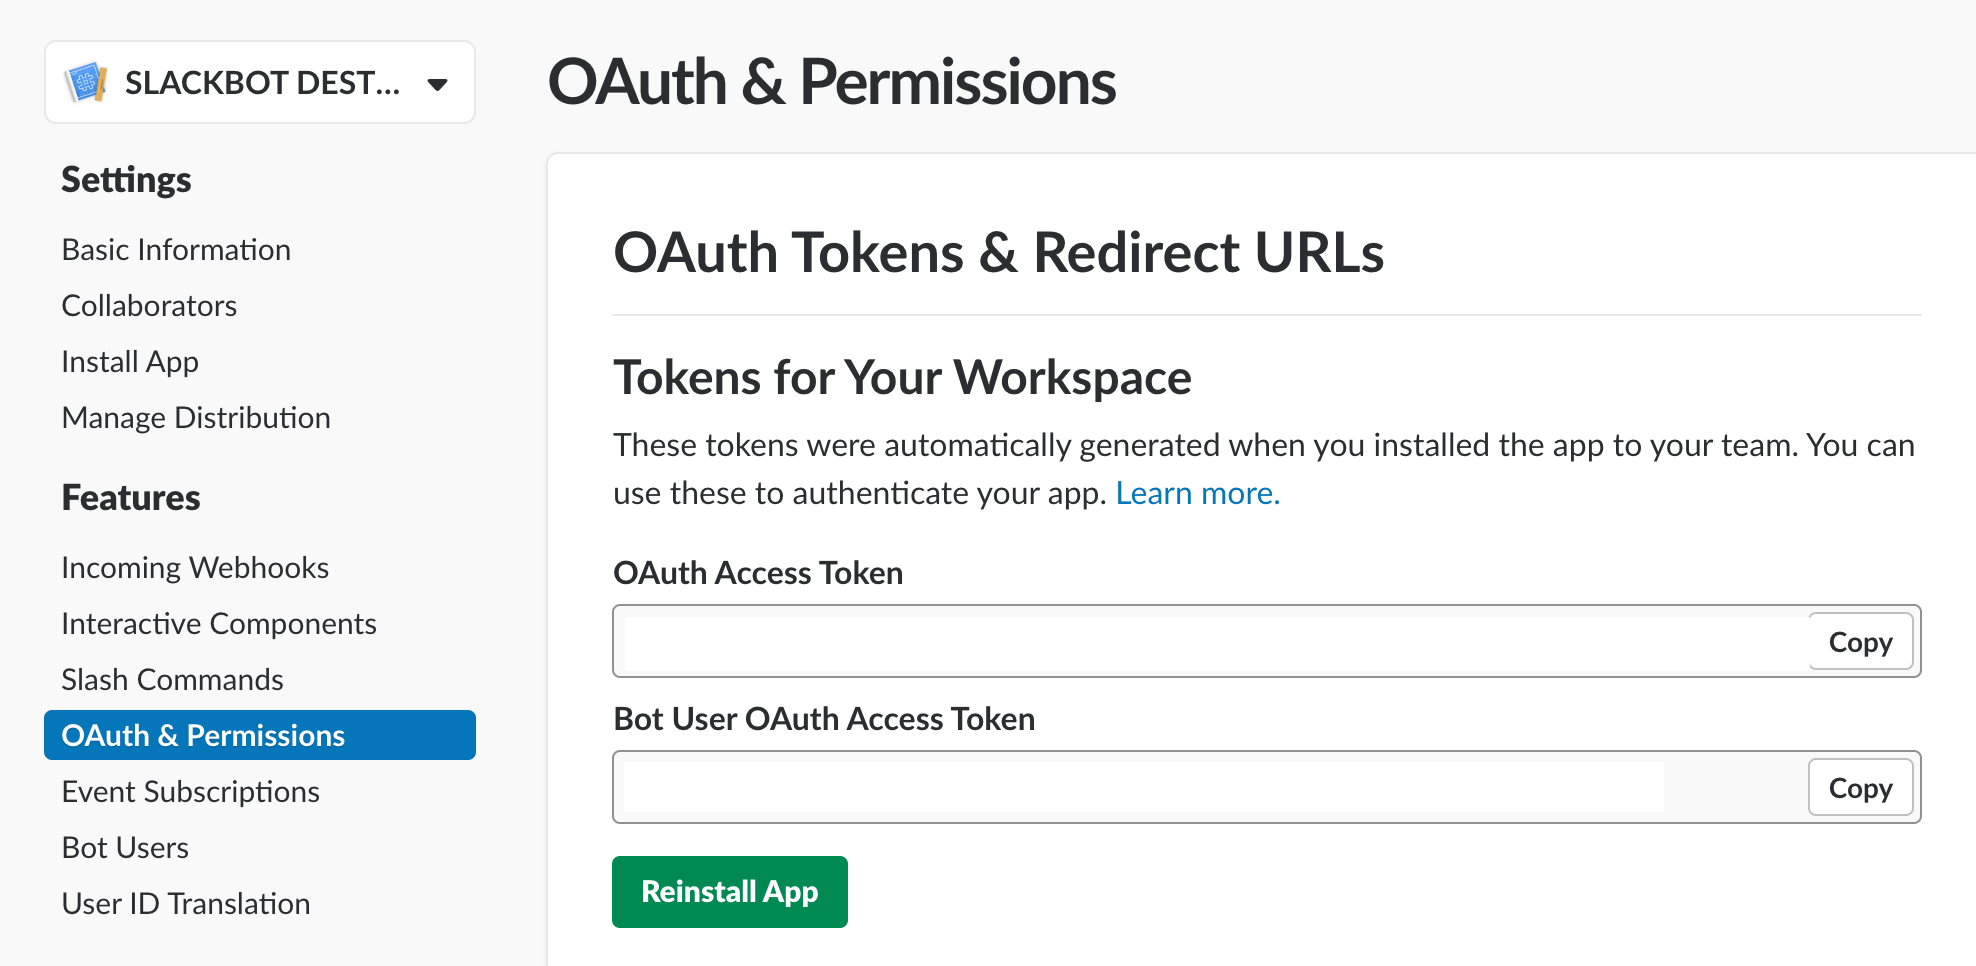 Shows OAuth Access Token and Bot User OAuth Access Token fields